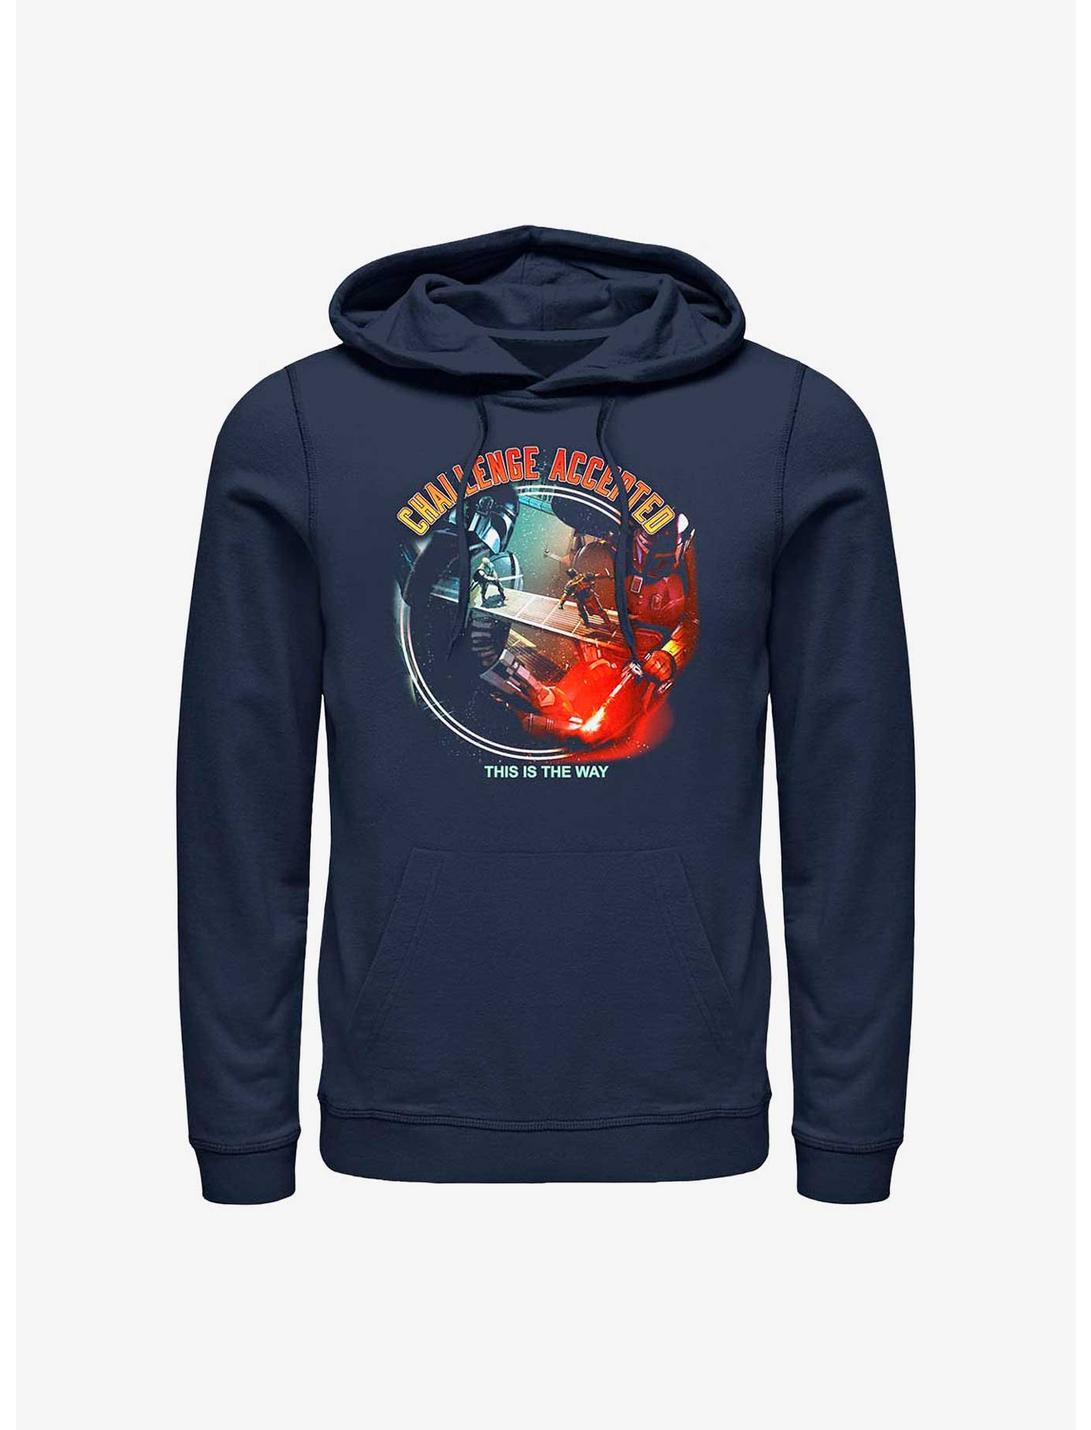 Star Wars The Book Of Boba Fett Challenge Accepted Hoodie, NAVY, hi-res